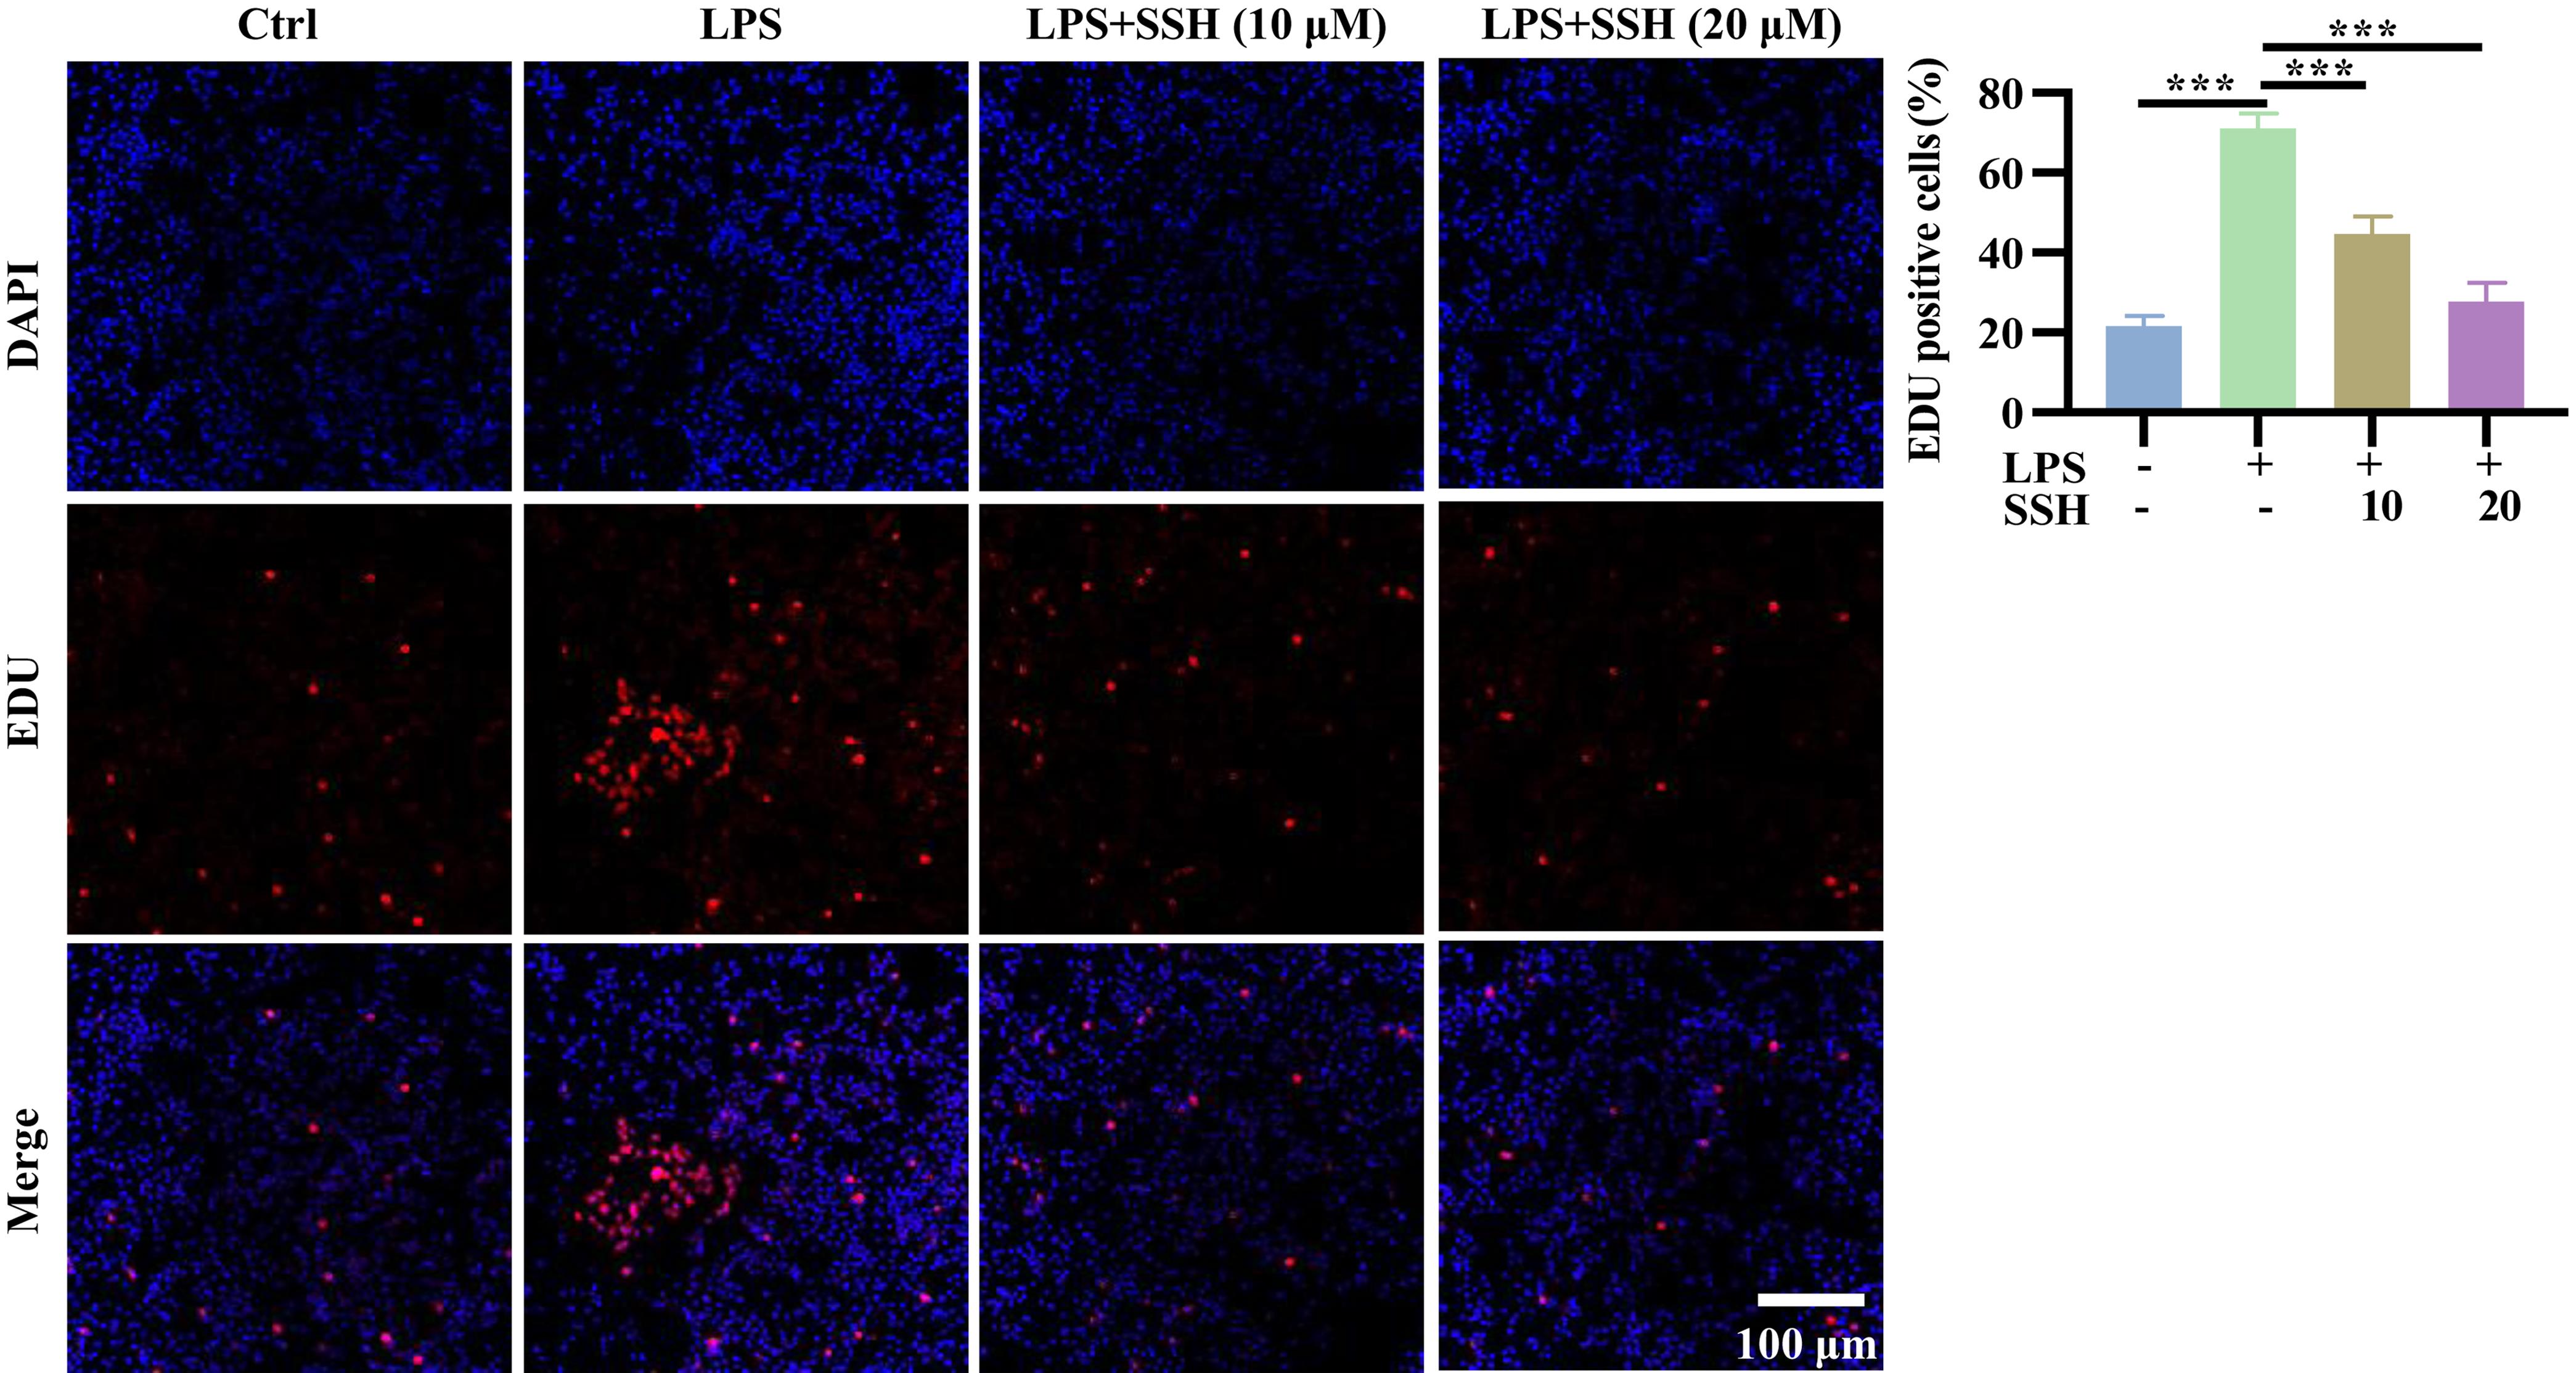 SSH significantly reduced LPS-induced proliferation in macrophages.